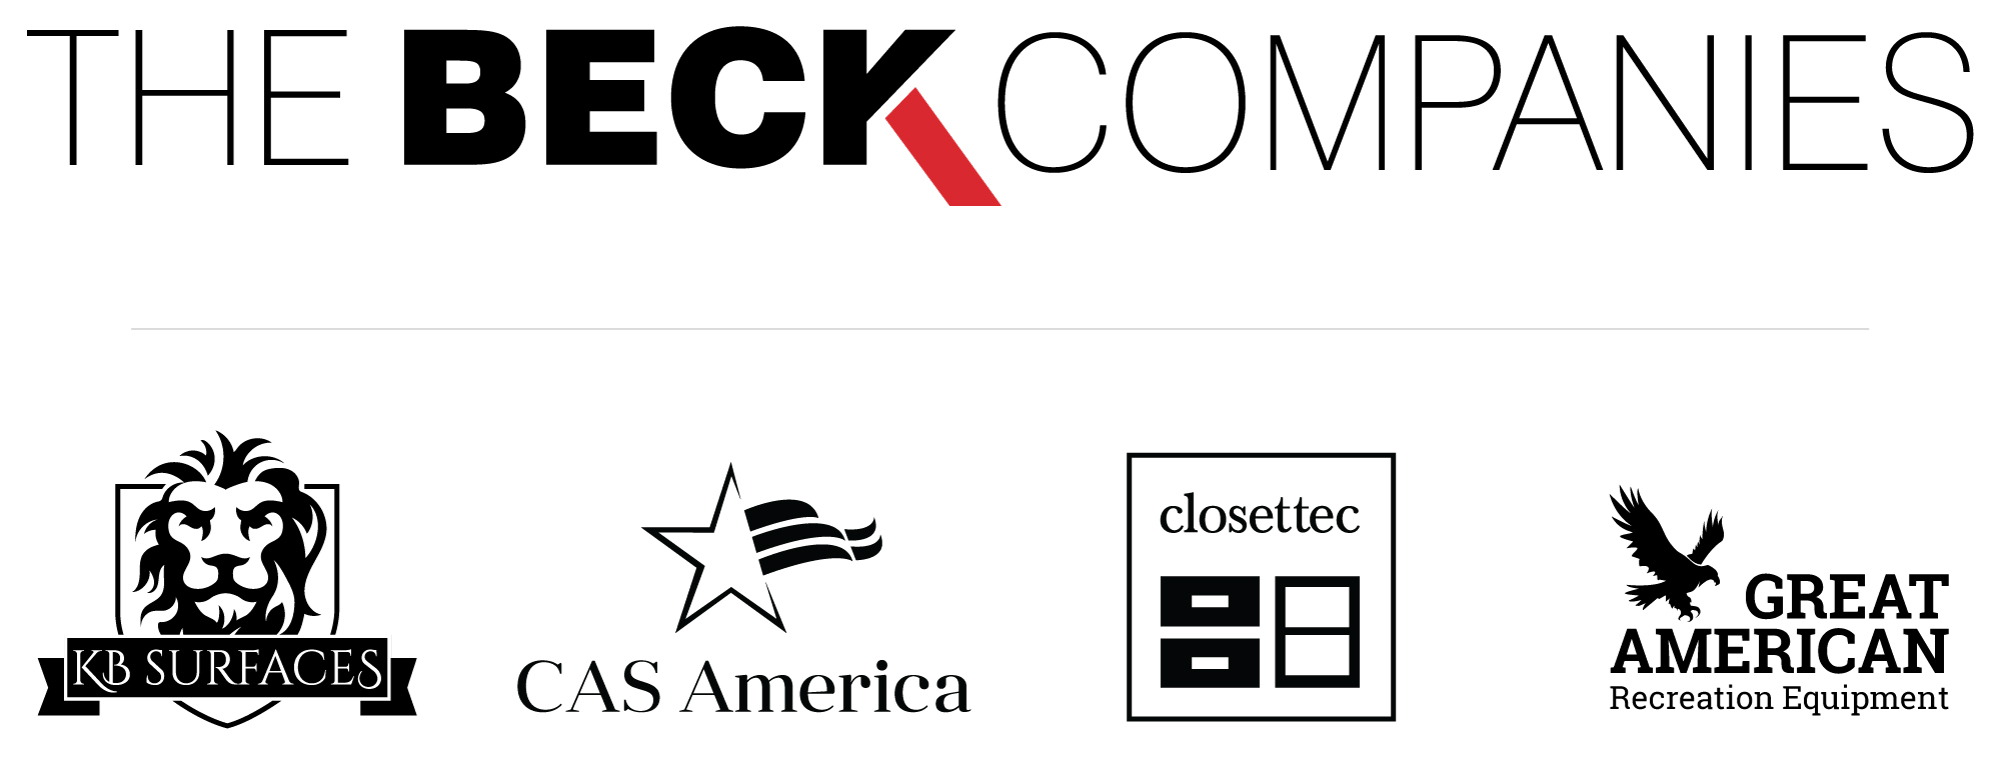 The Beck Companies, Tuesday, December 12, 2017, Press release picture